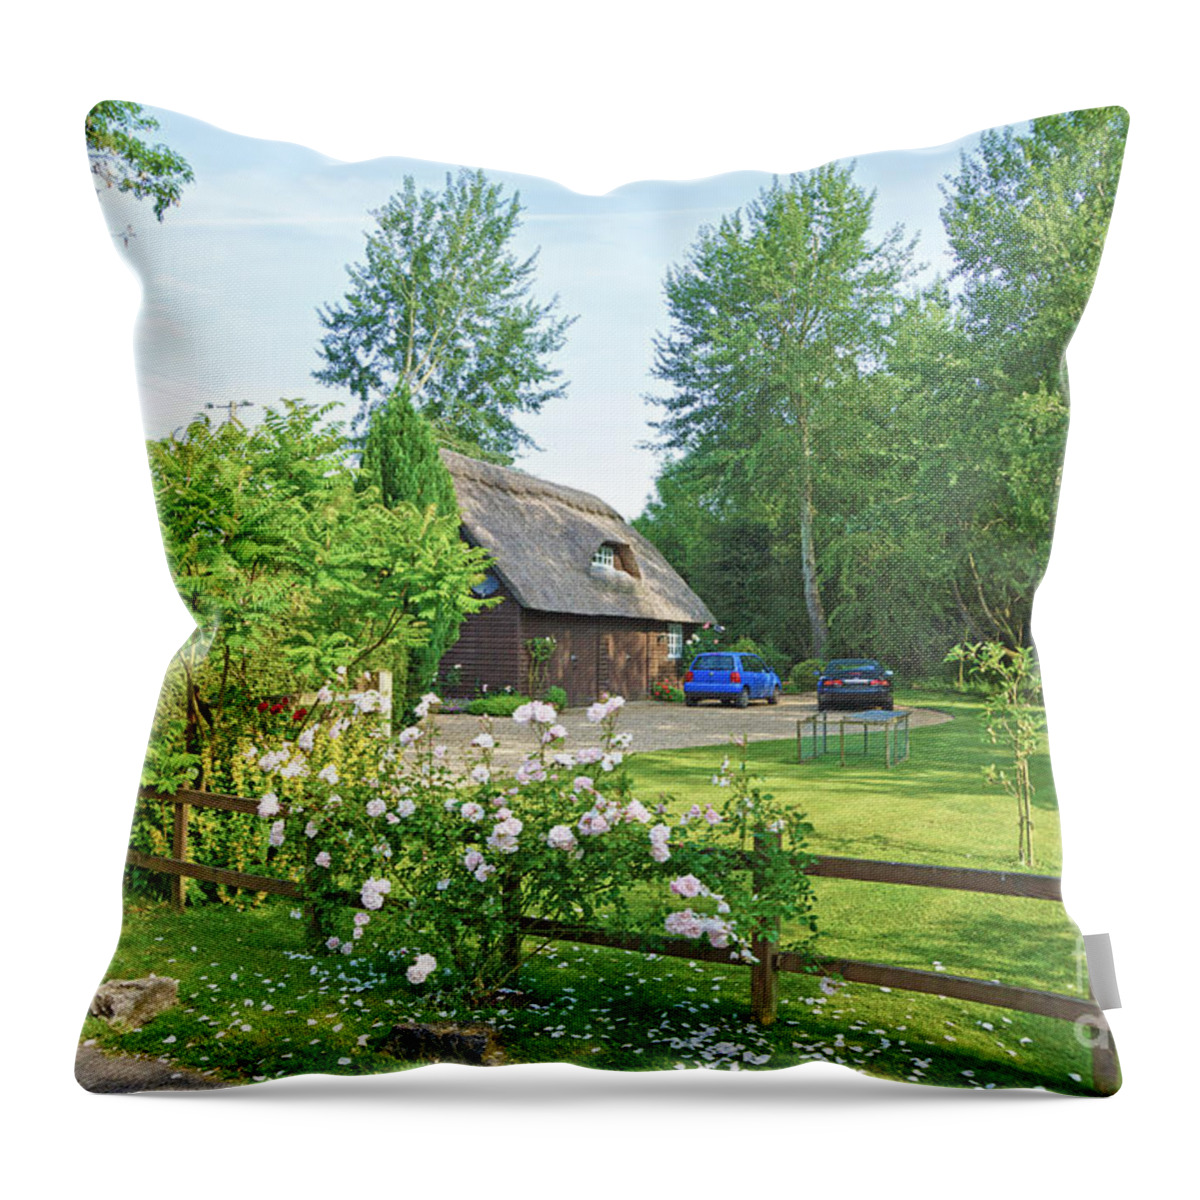 Homes Throw Pillow featuring the digital art Home Sweet Home by Andrew Middleton